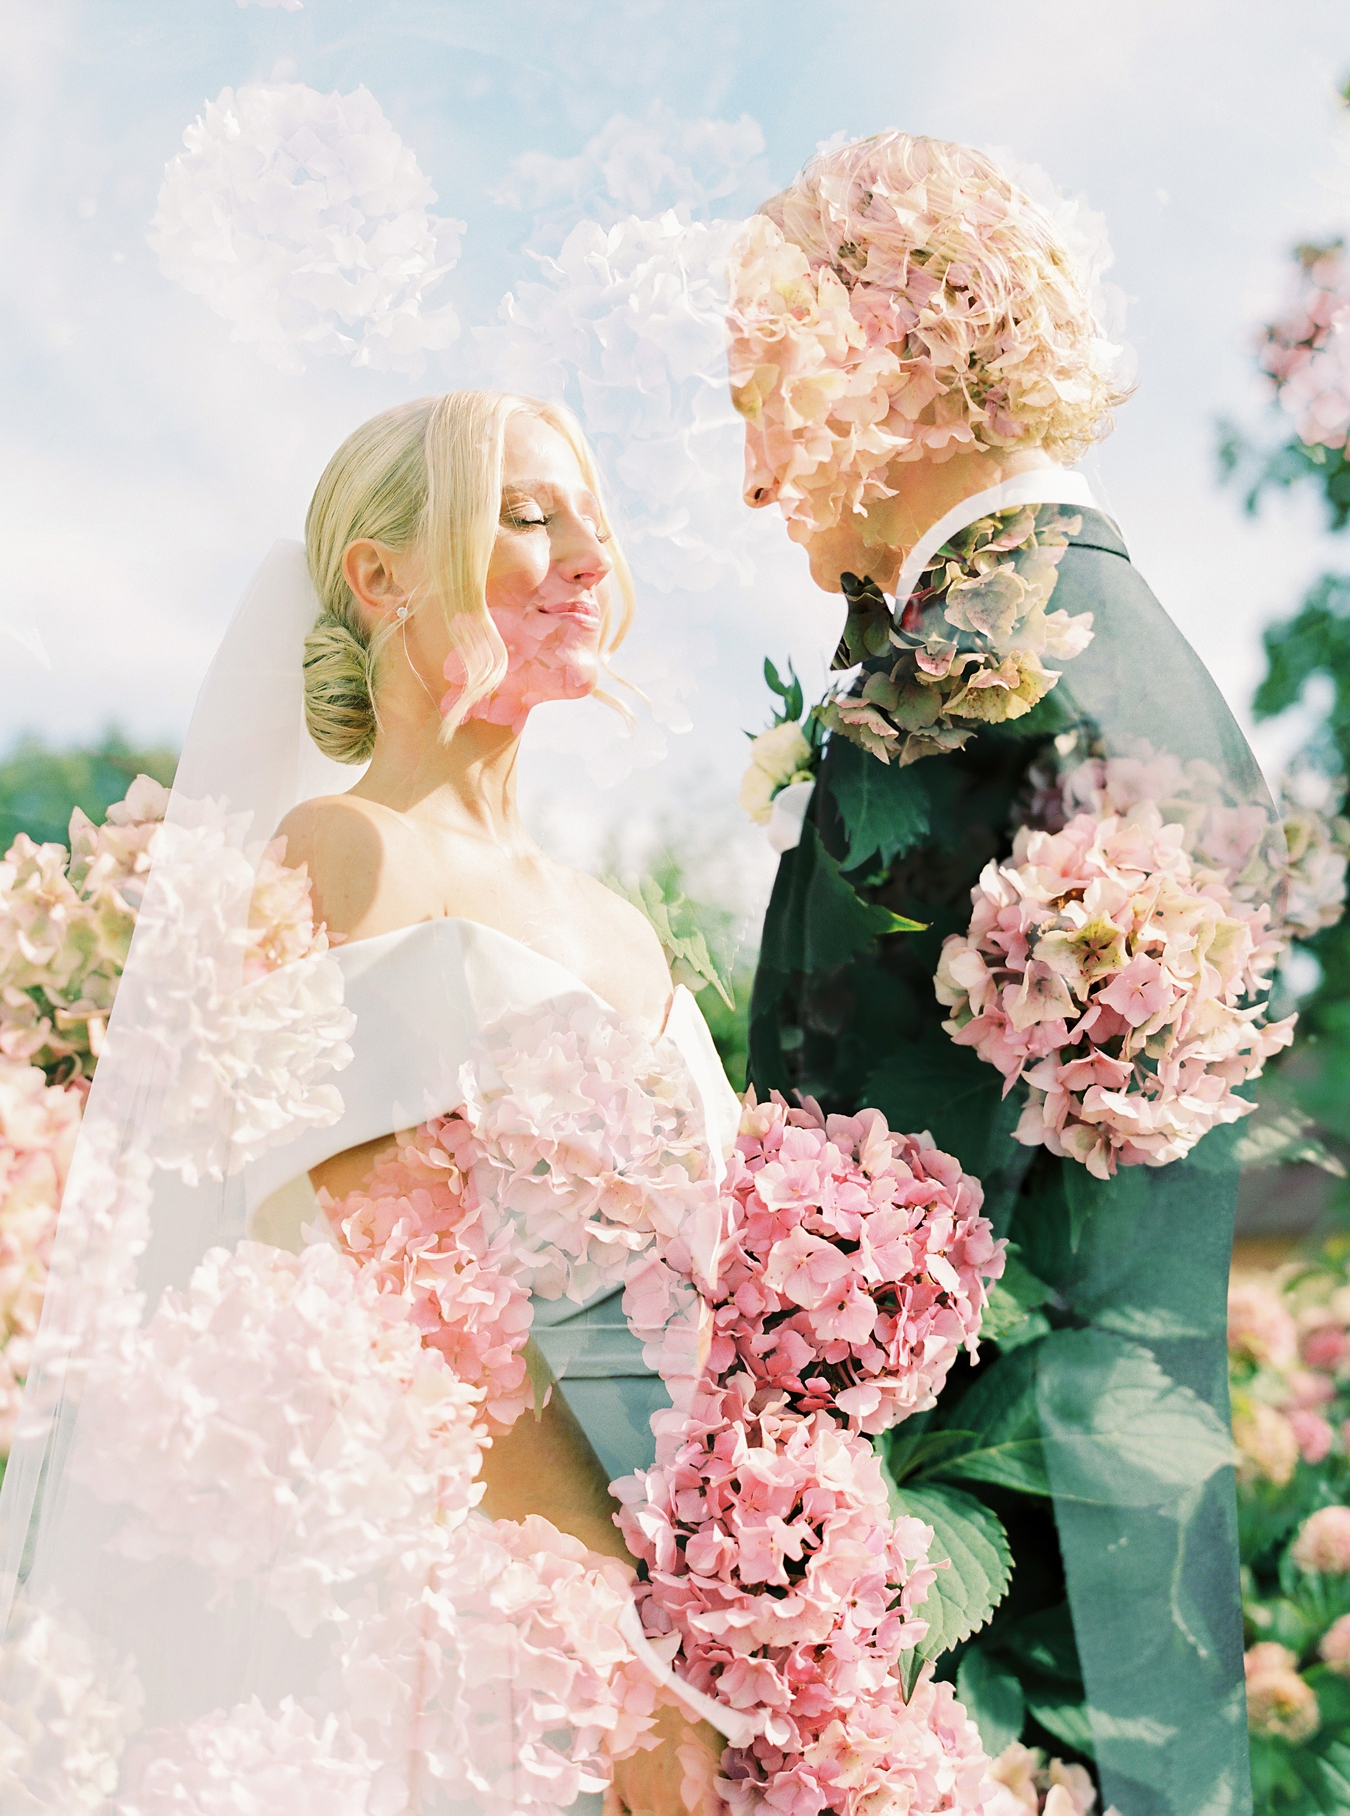 Double exposure in camera on film with the bride and groom mixed with pink flowers